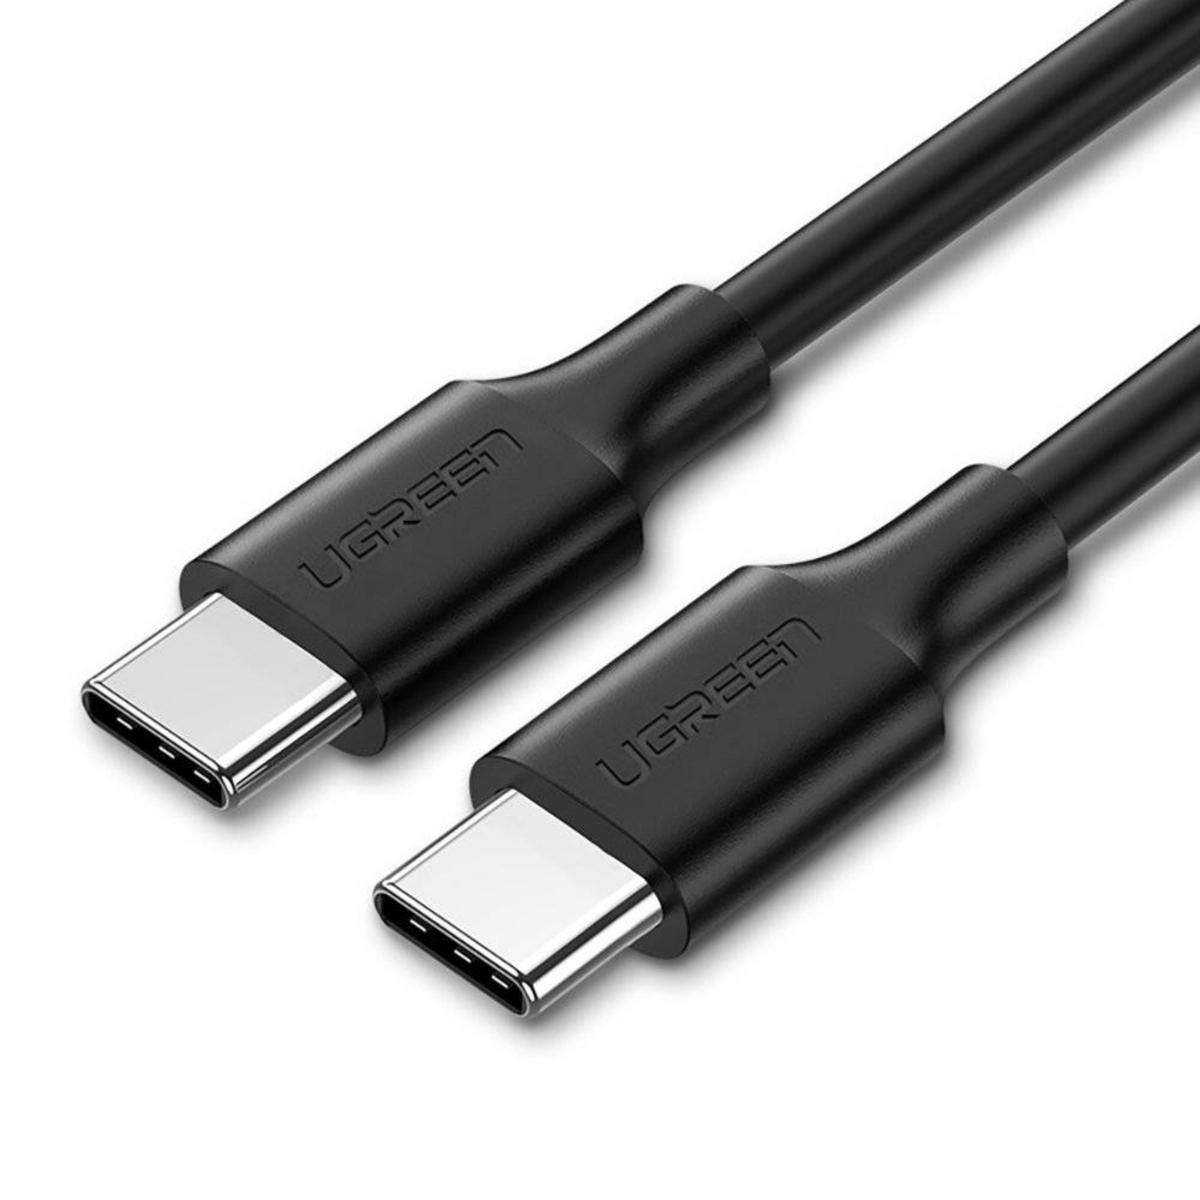 Ugreen USB 2.0 Type C to Type C Nikel Plating Cable, 3A, 3 m, Black, US2863M